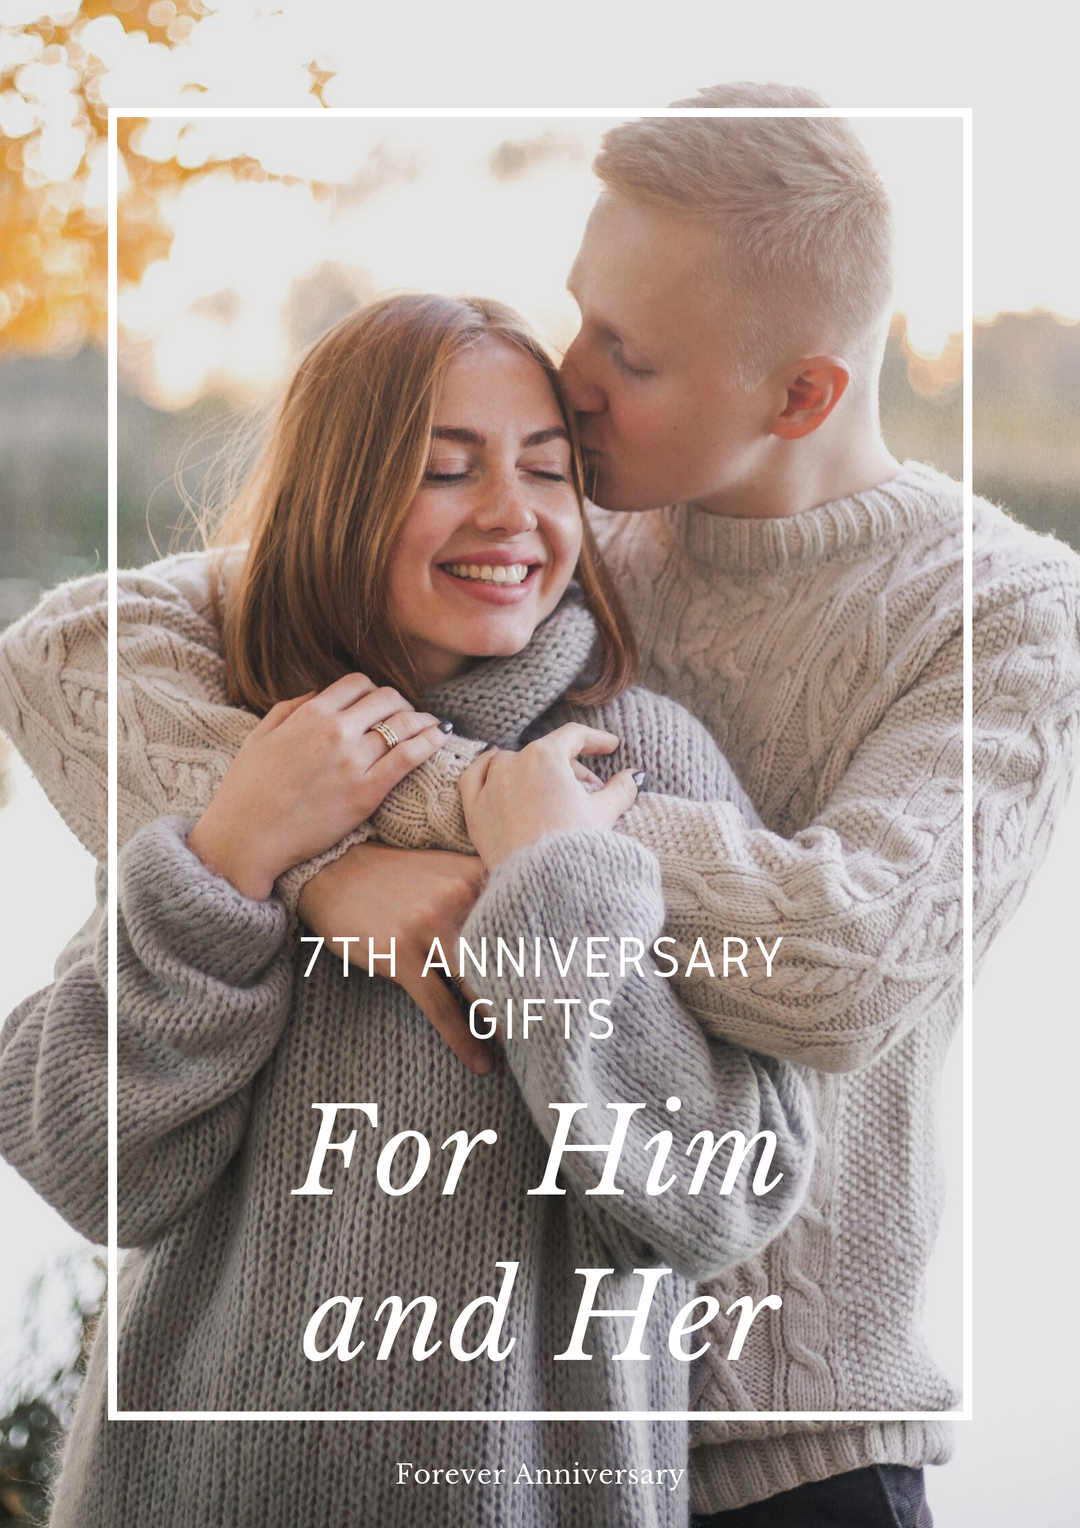 7th Anniversary Gifts for Him and Her